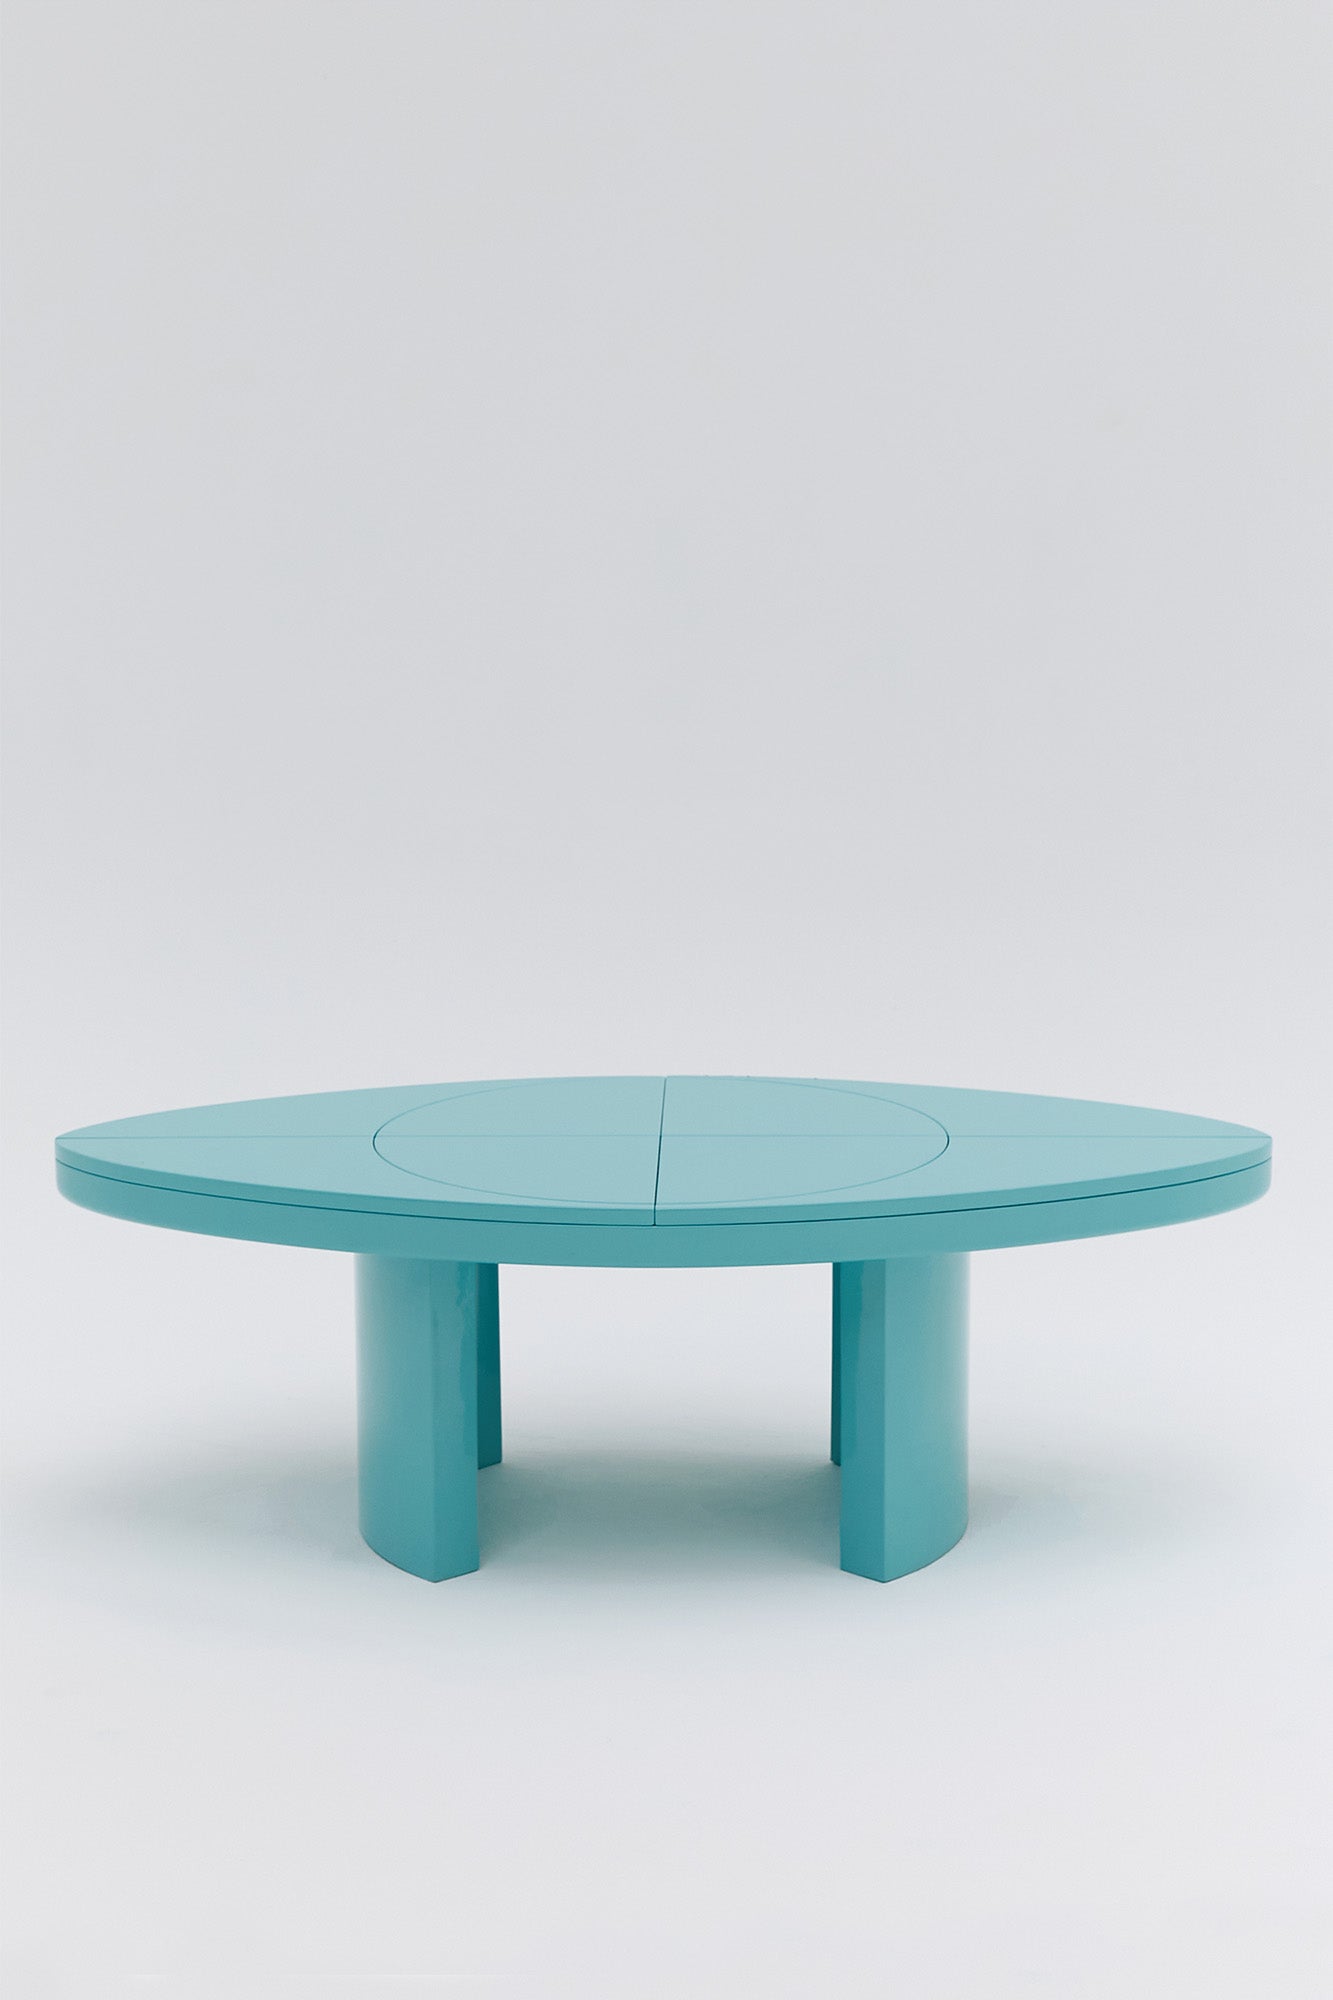 Shiny Laquered Blue Table